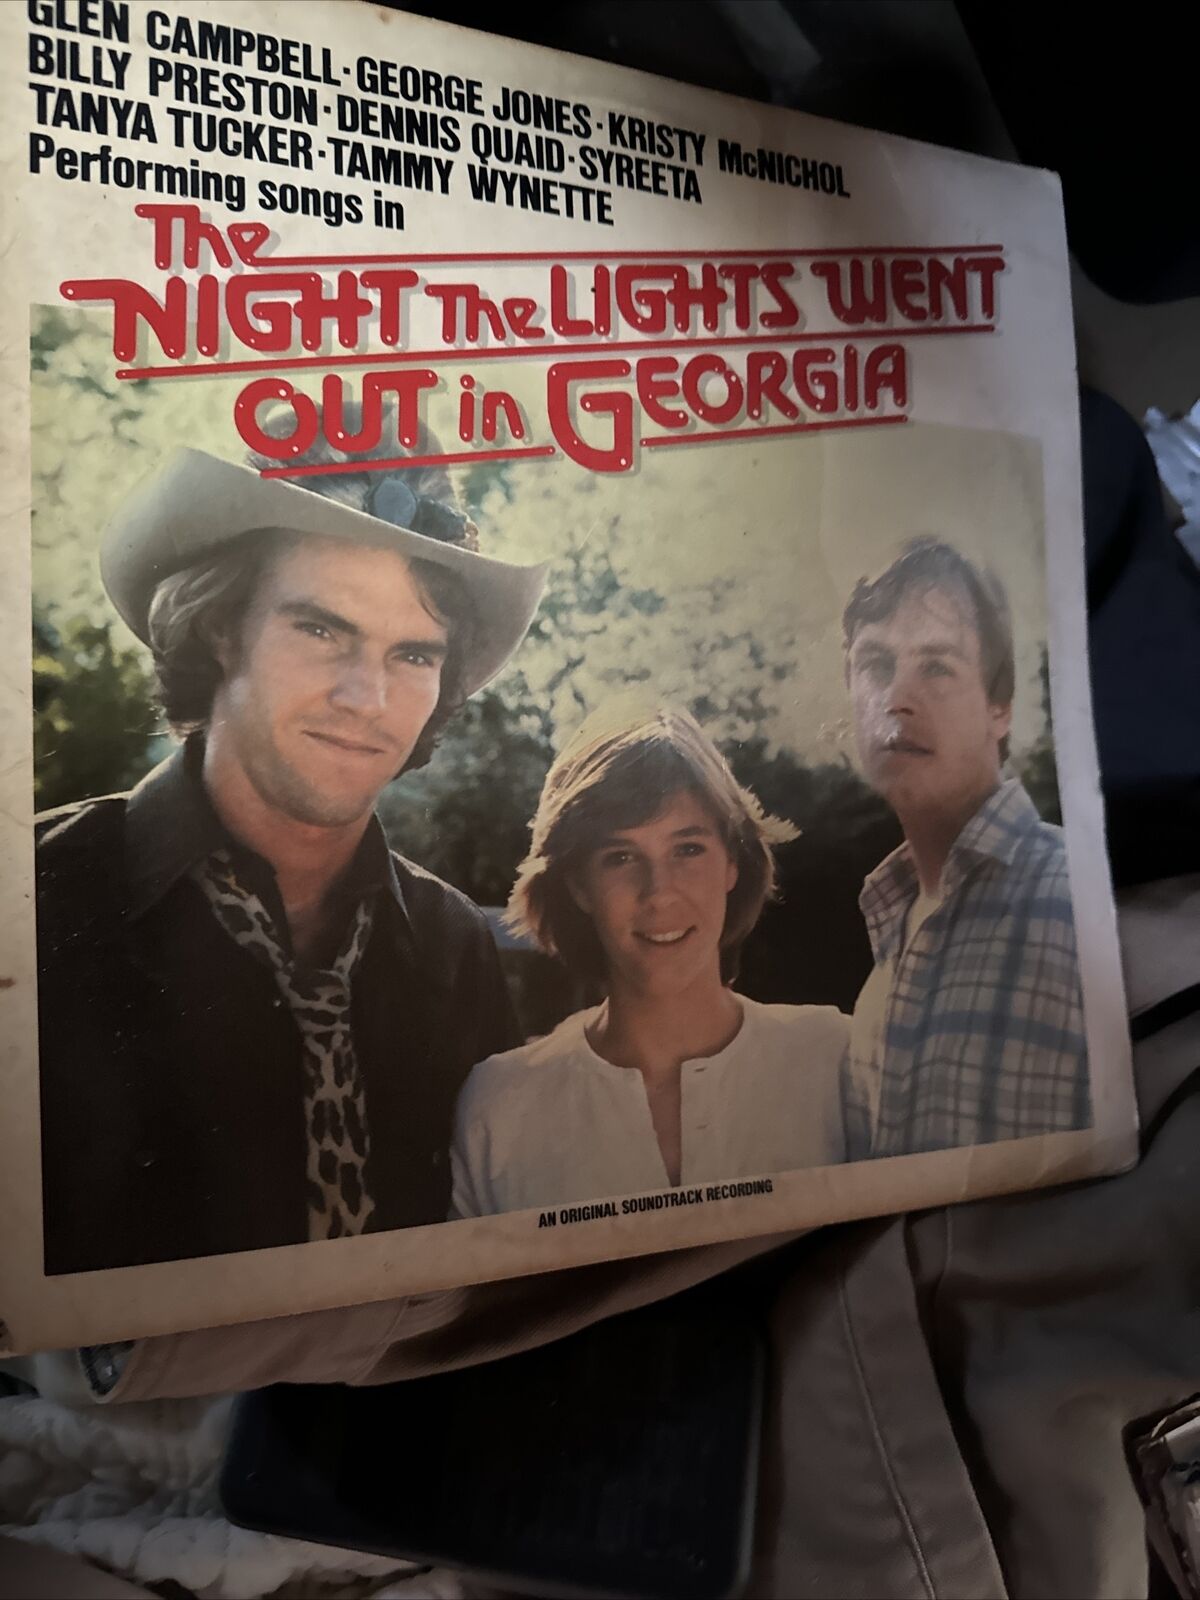 THE NIGHT THE LIGHTS WENT OUT IN GEORGIA SOUNDTRACK OST LP   VINYL RECORD